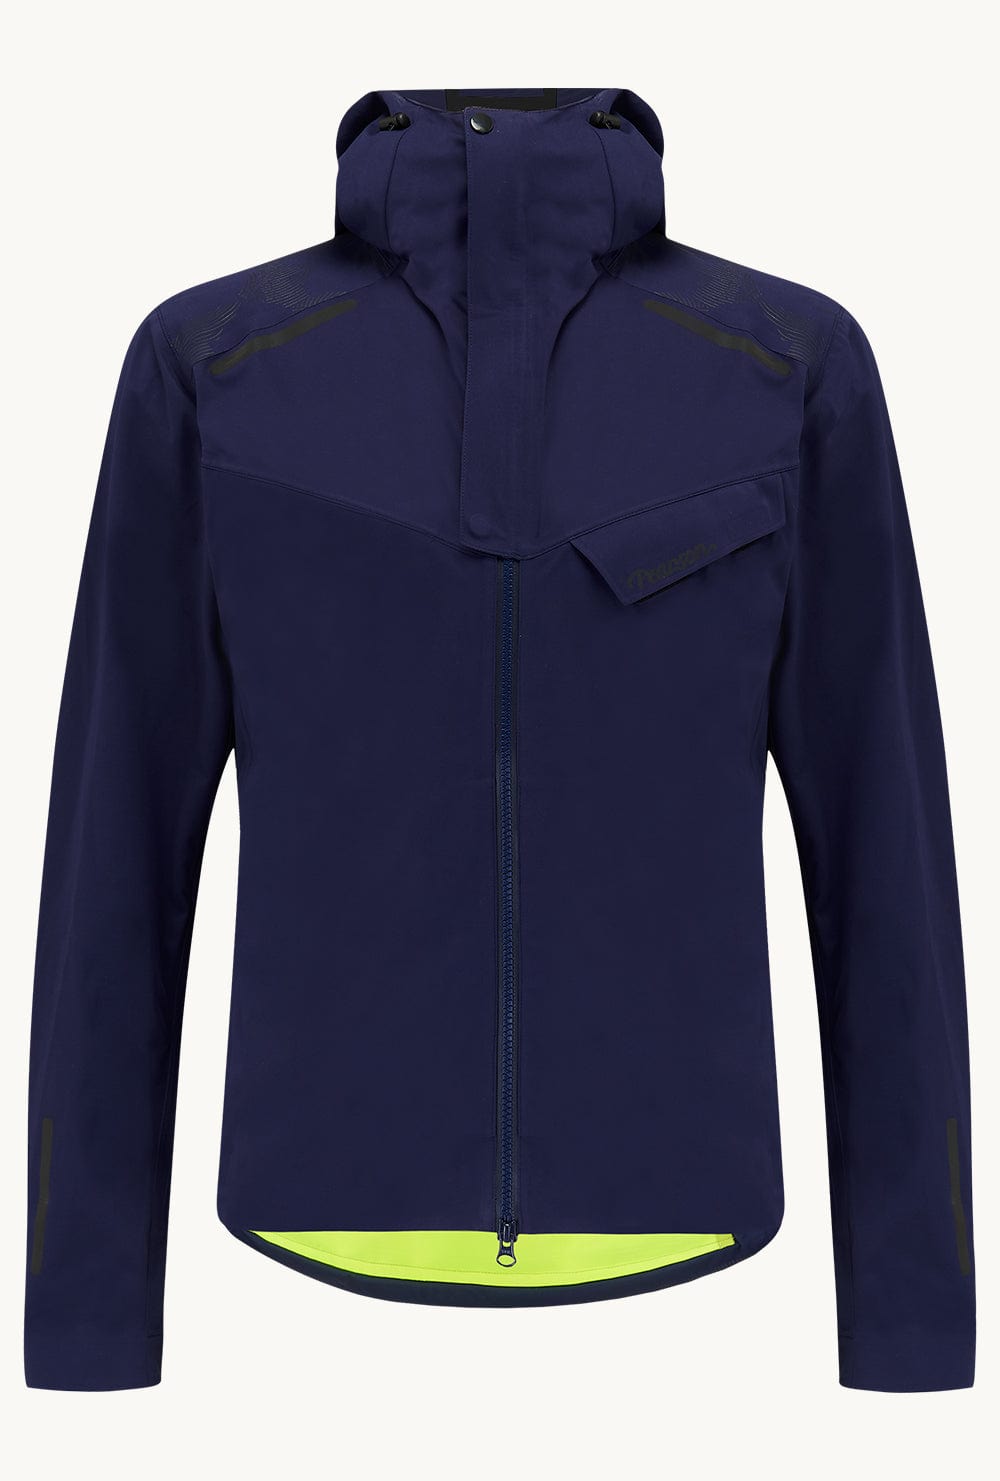 Pearson Cycles Pearson 1860, Streets Ahead - Waterproof Commuter Jacket Navy, Small / Navy